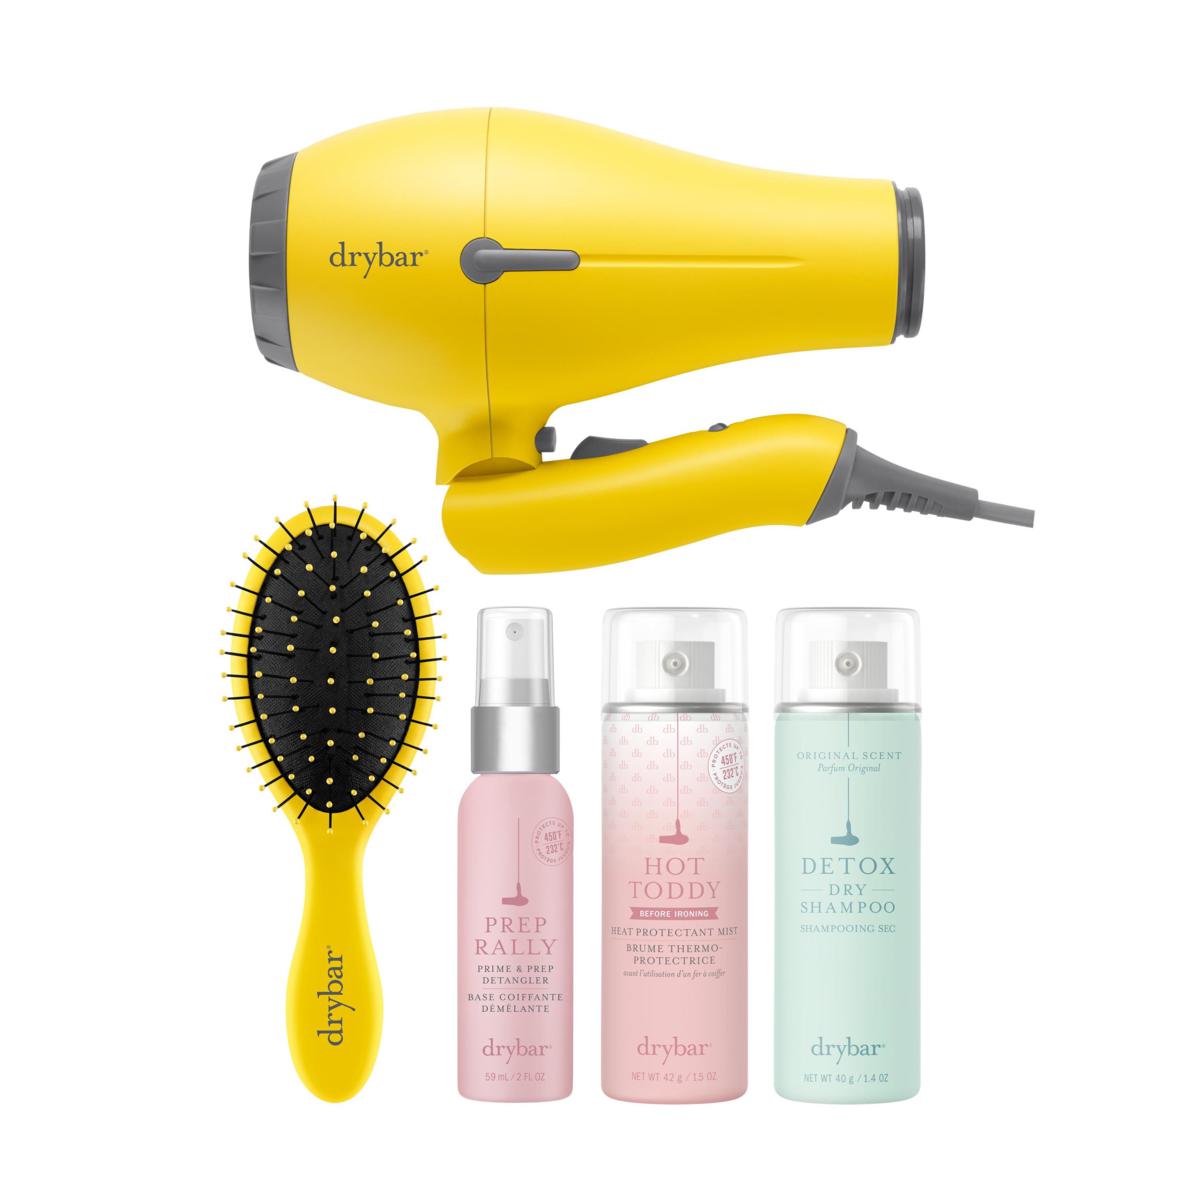 the drybar baby buttercup bundle, a top-rated hair tool from HSN